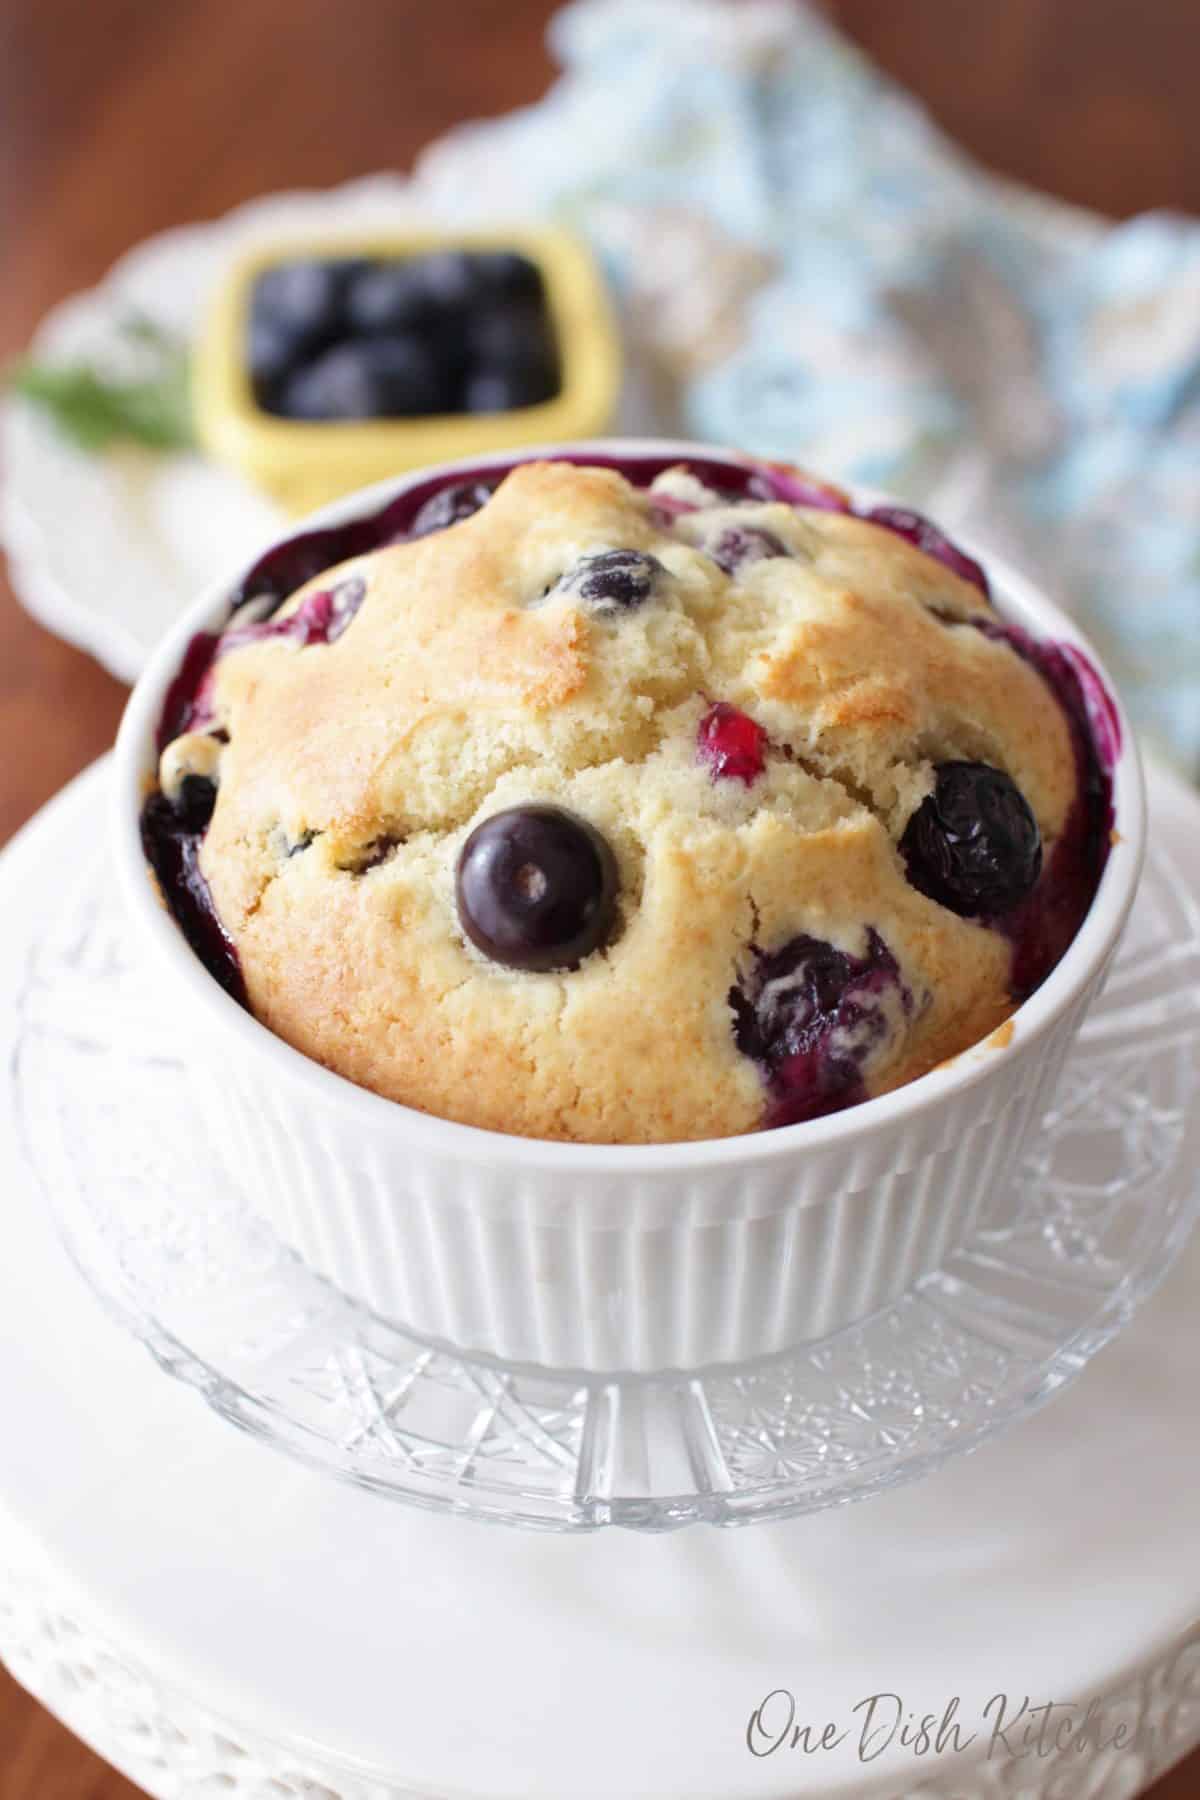 A blueberry muffin in a ramekin plated next to a small bowl of blueberries.